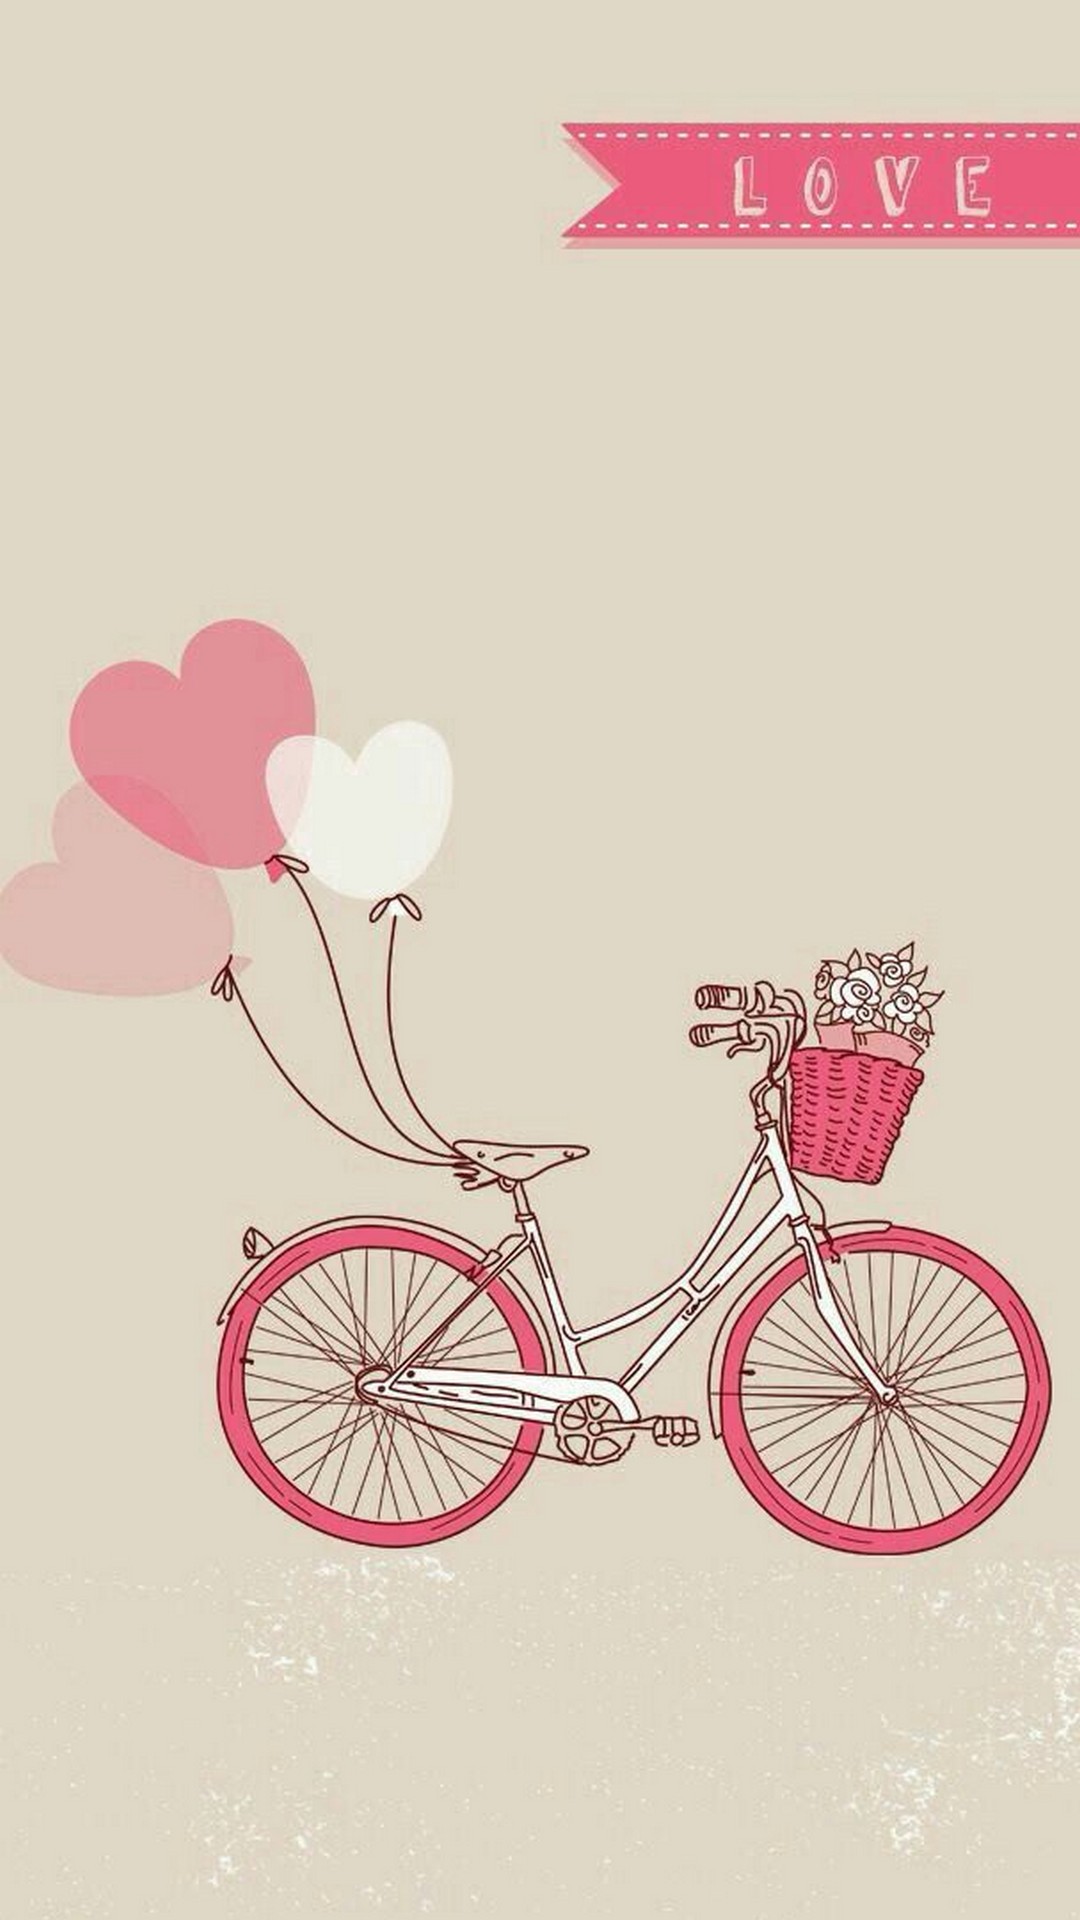 Cute Valentine For iPhone Wallpaper resolution 1080x1920